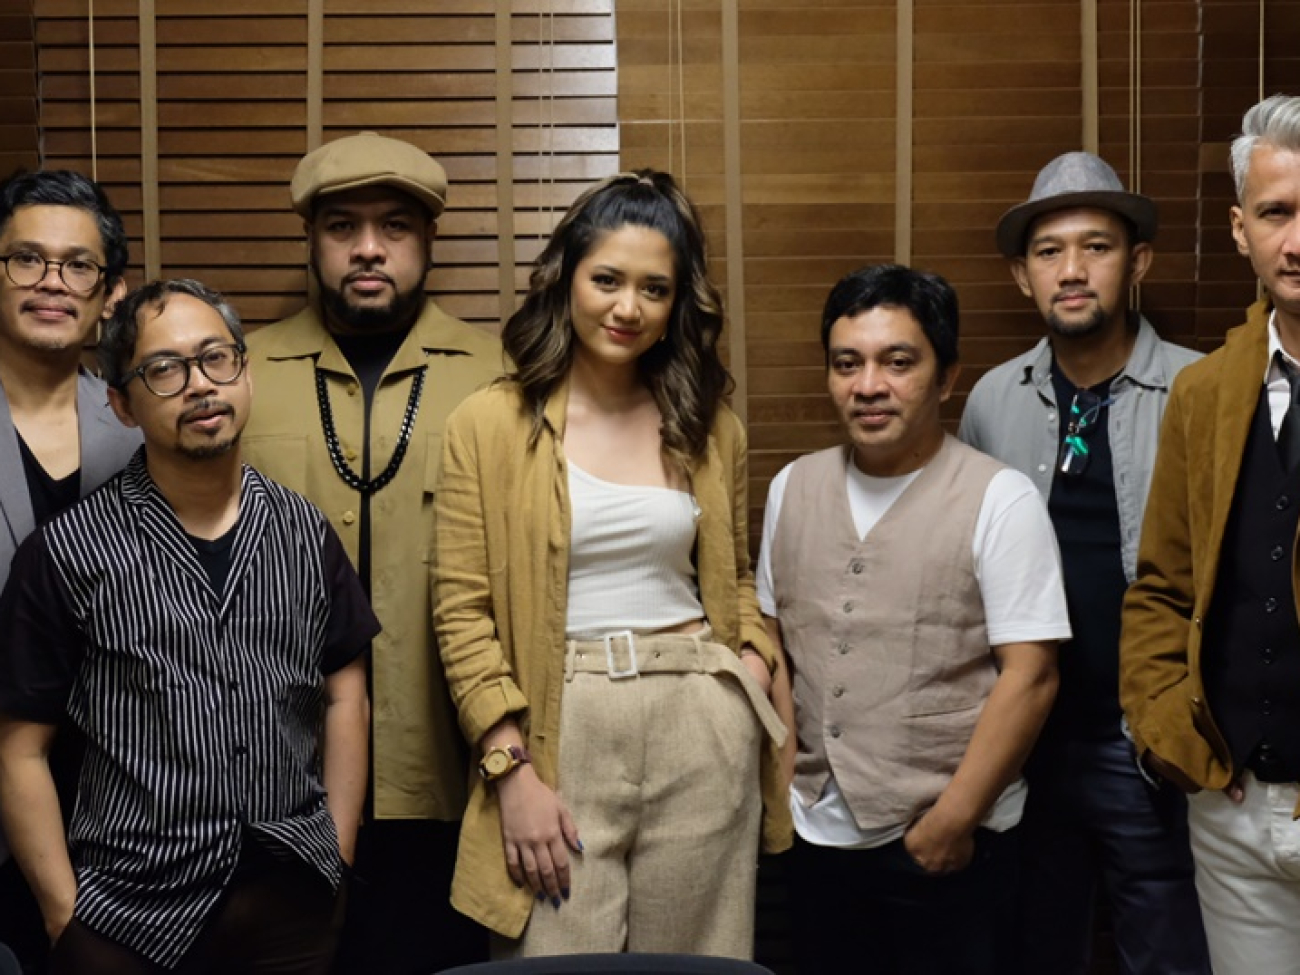 The Groove Feat Tiara Effendy - Copy